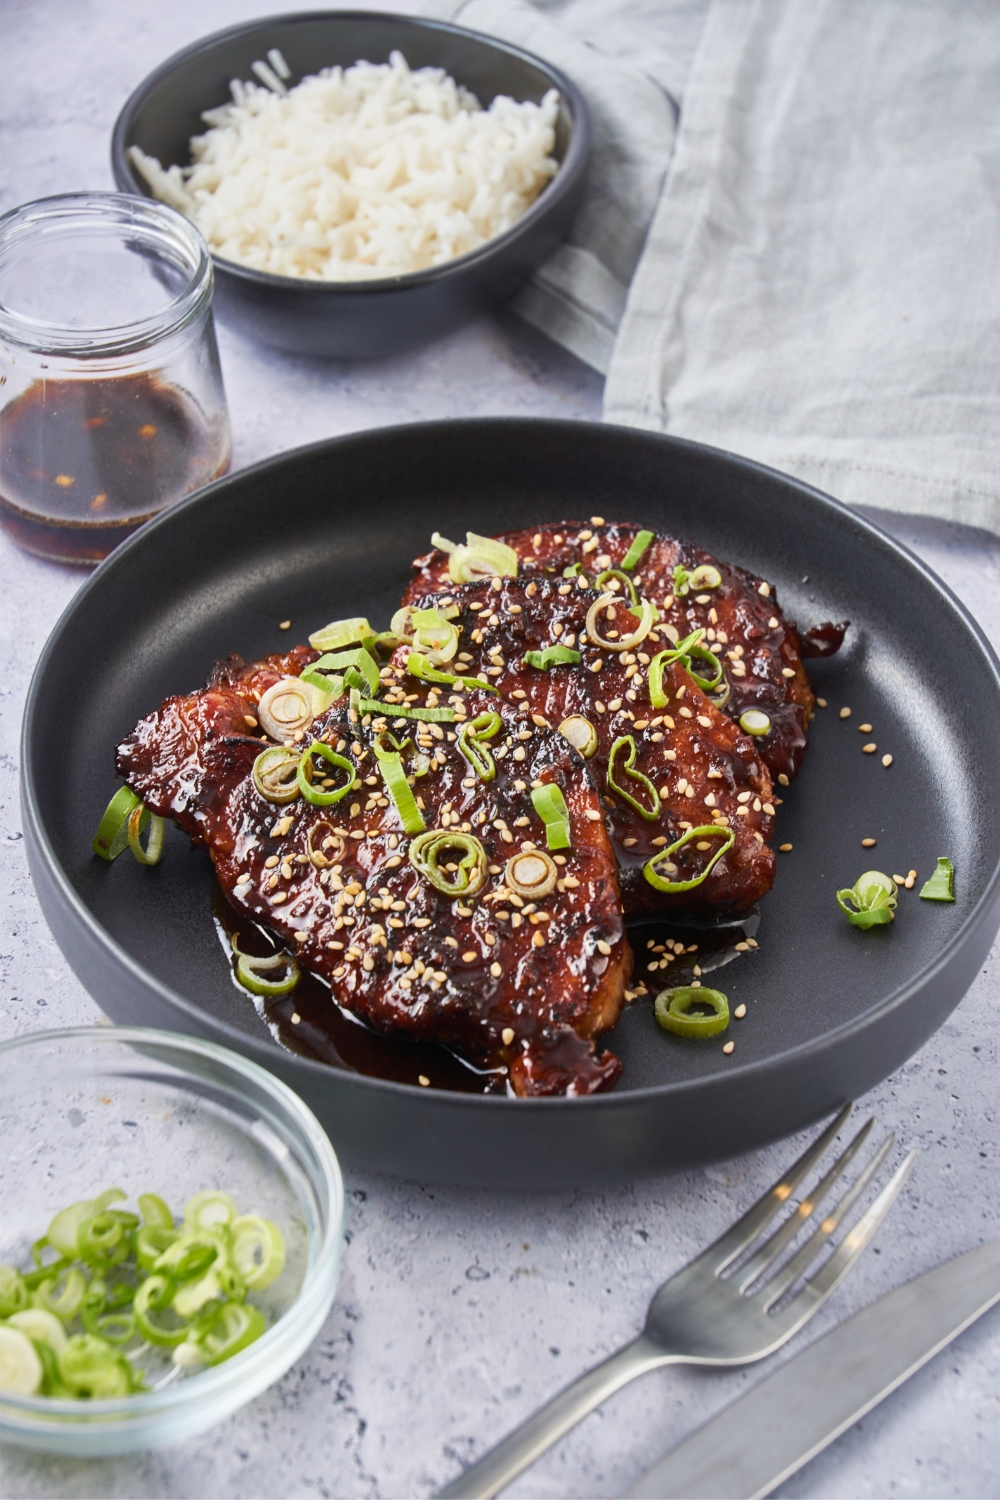 Korean pork chops garnished with chopped green onions and sesame seeds in a black plate served with a side of white rice.